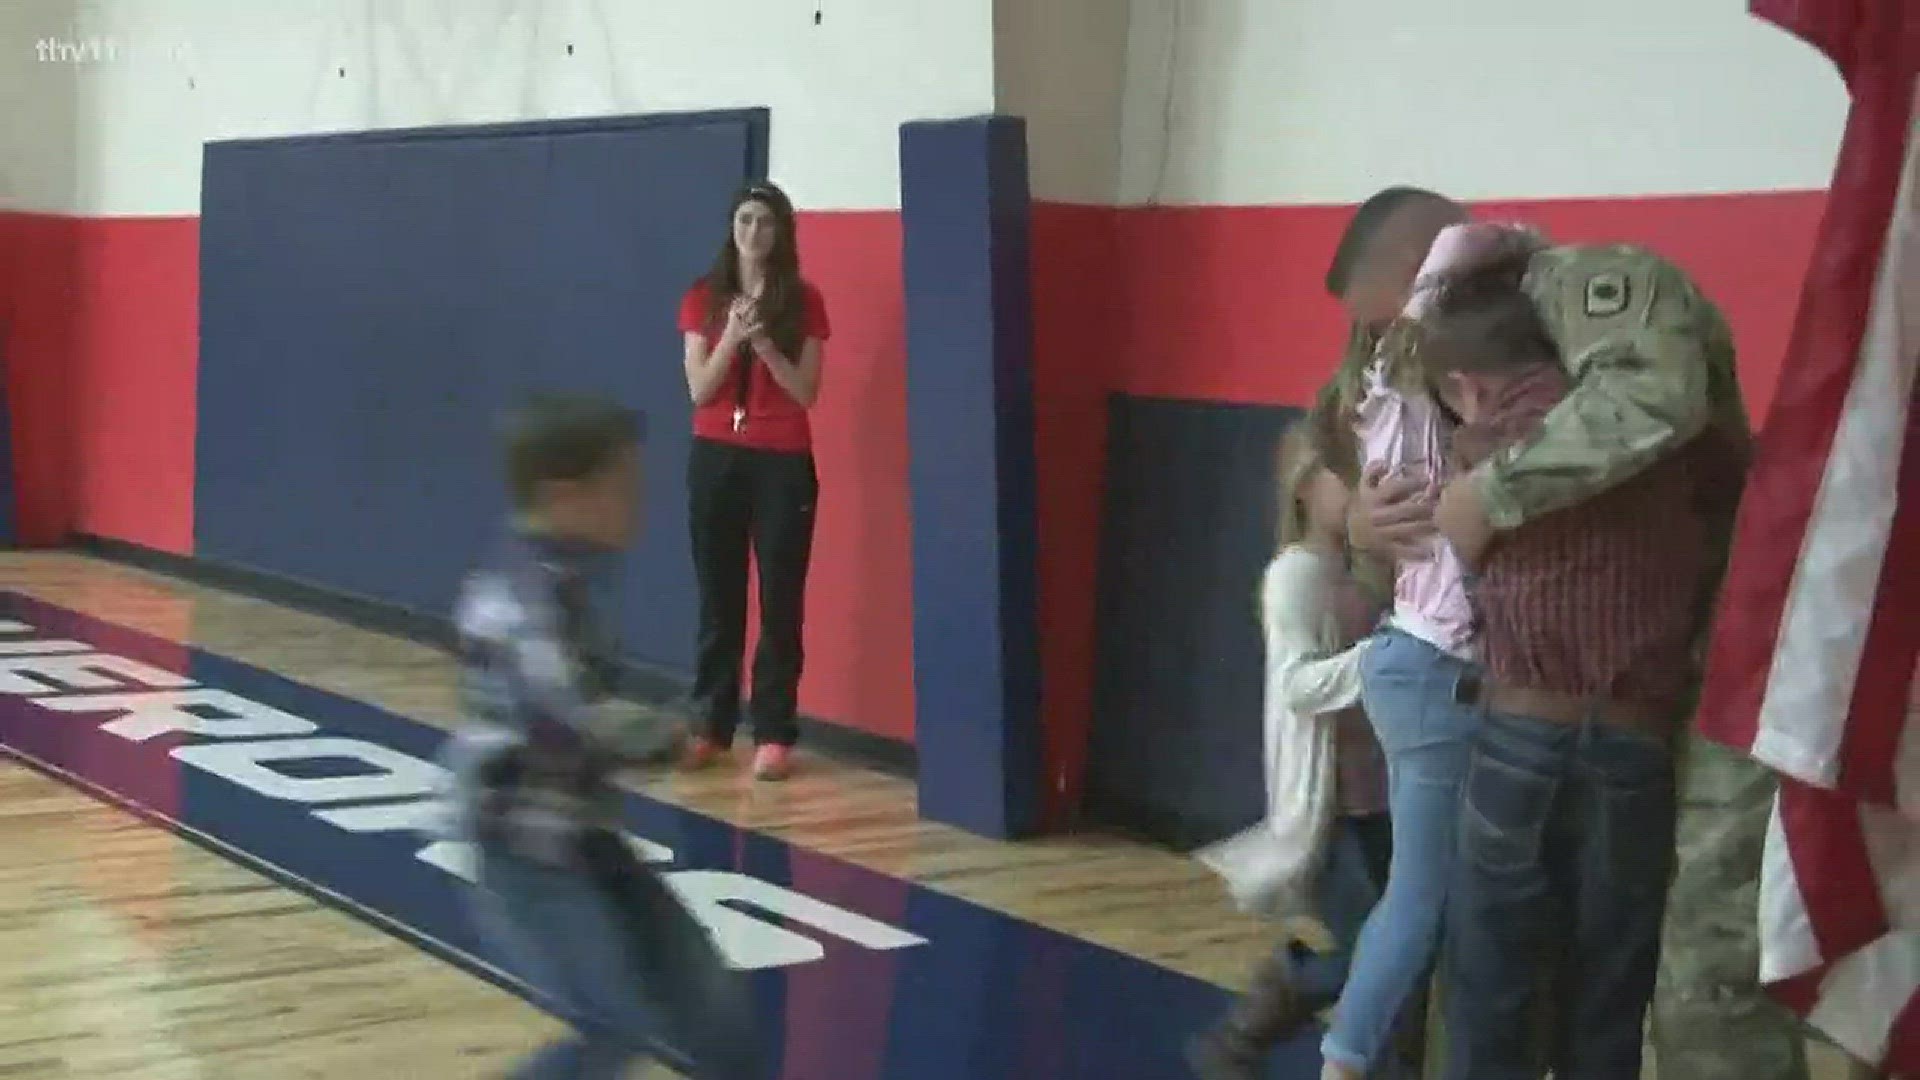 A father of four who was deployed for nearly a year in Africa came home and surprised his kids at a basketball game.